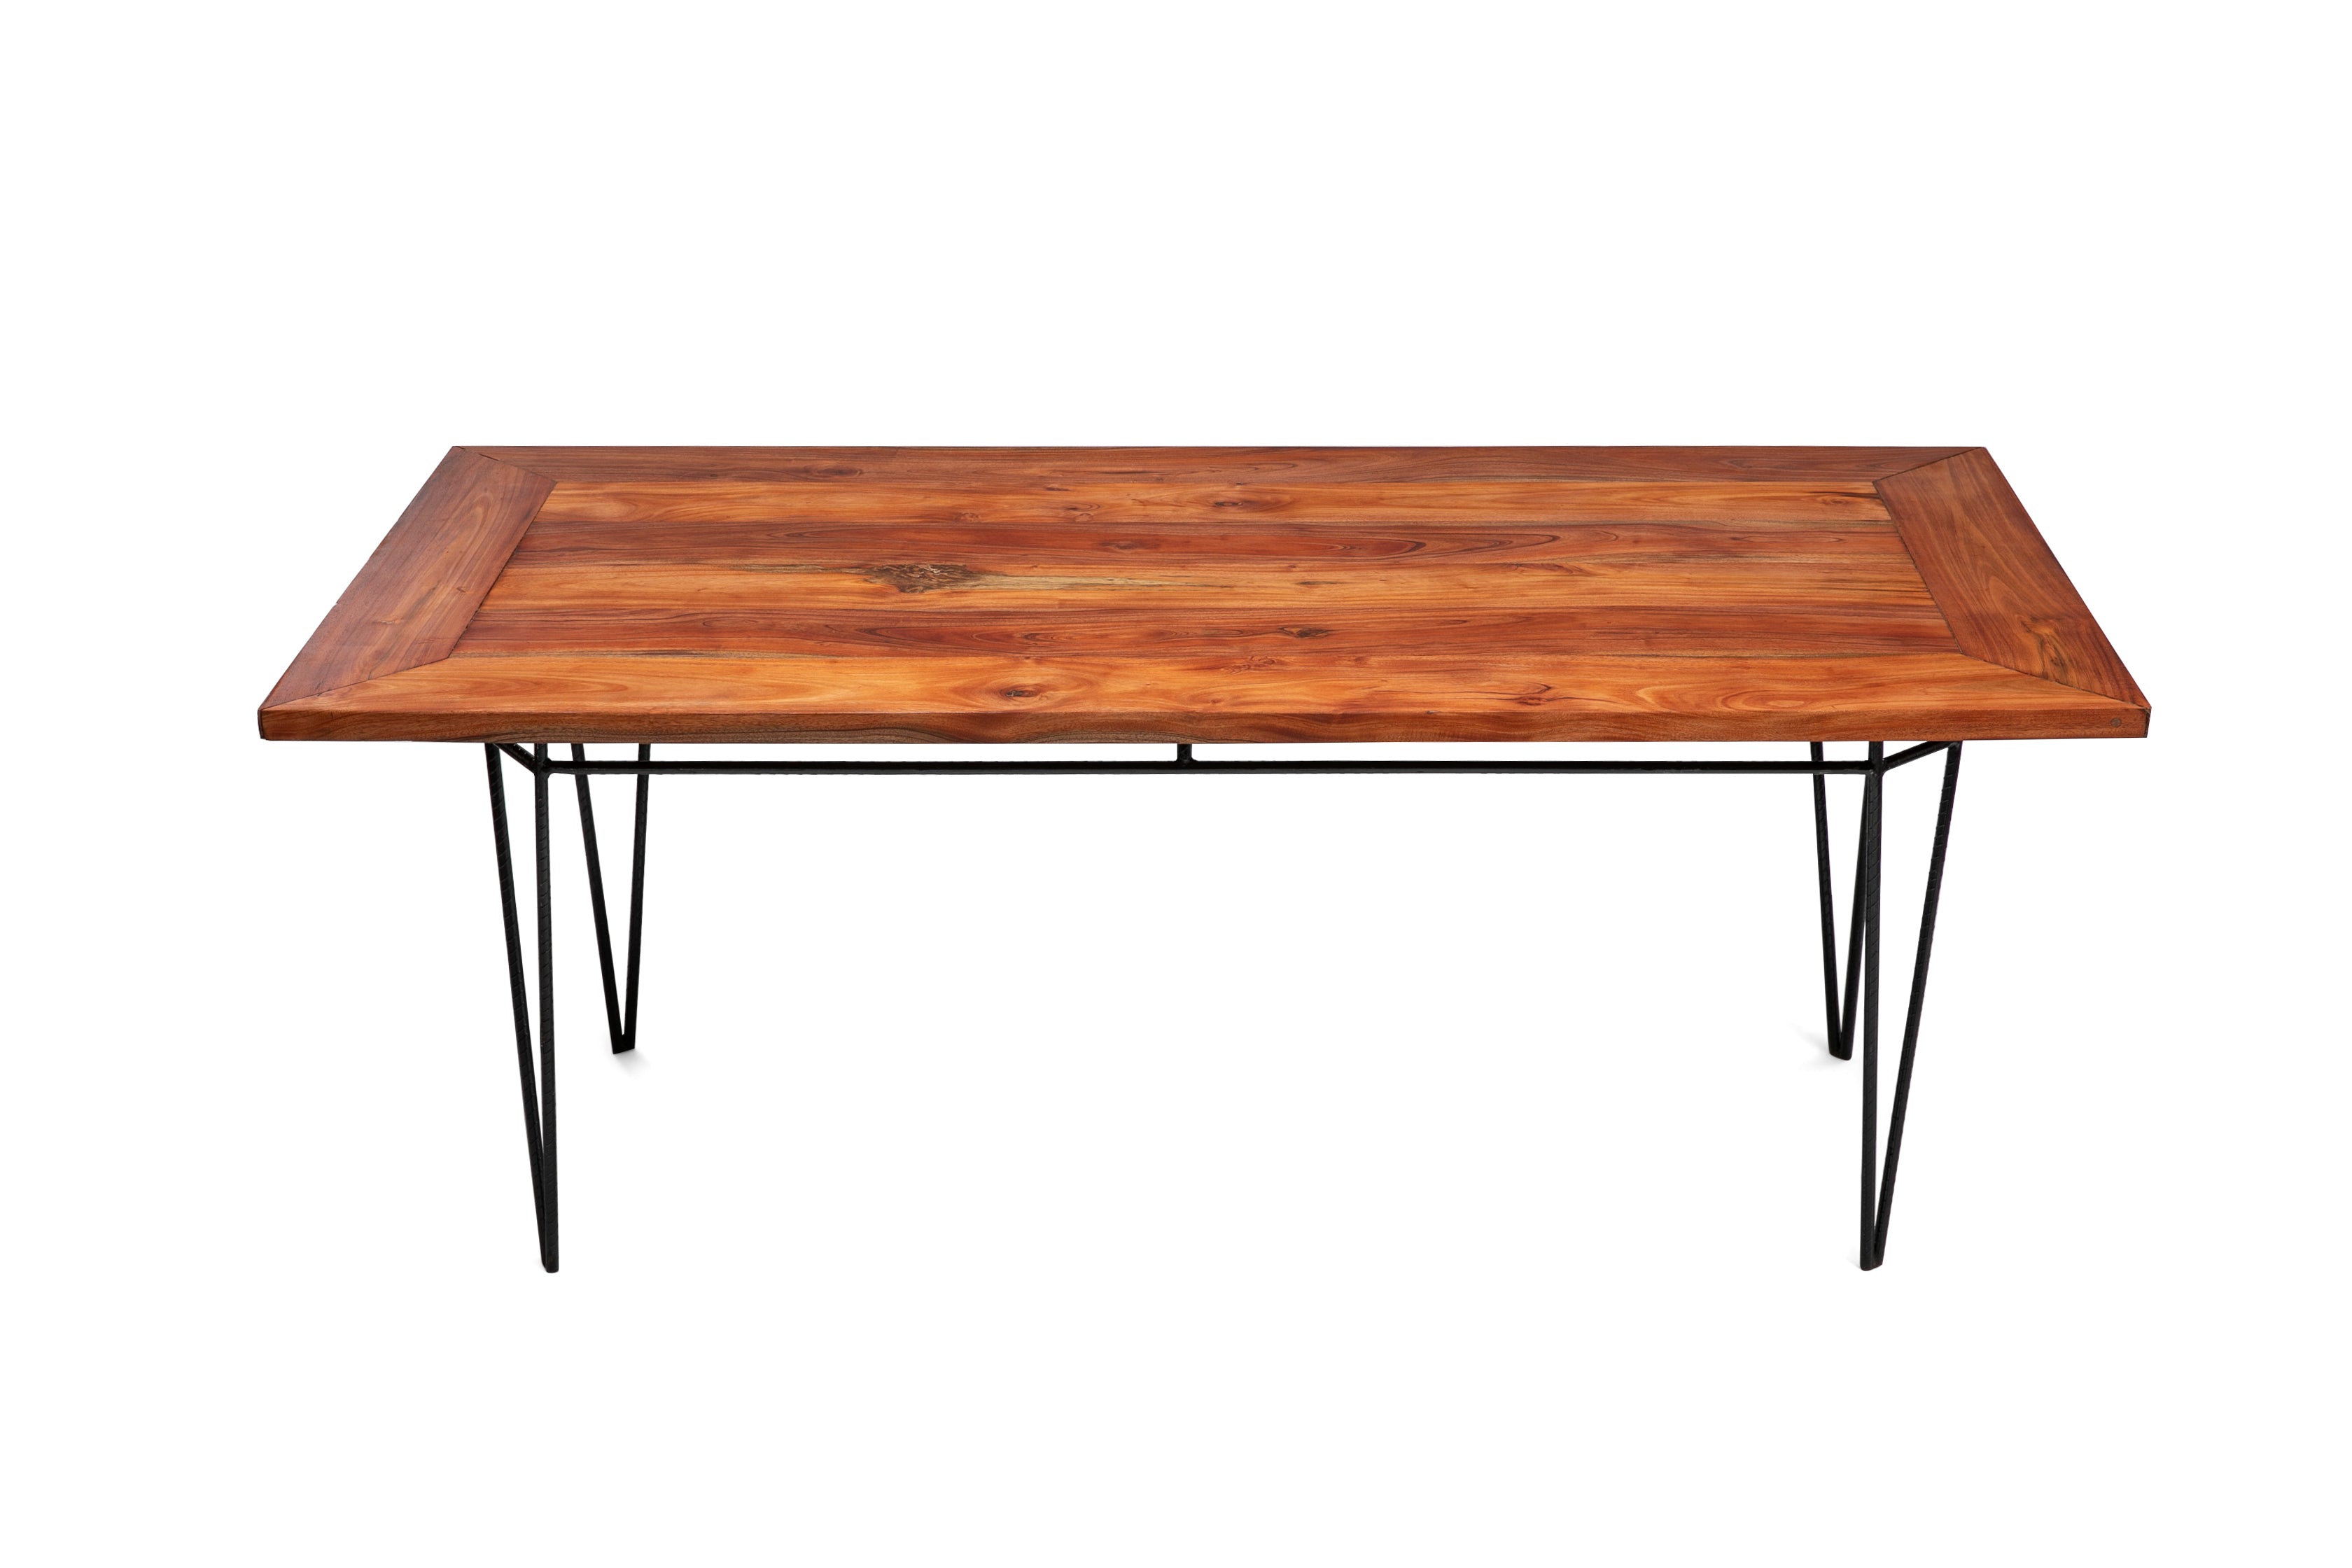 African Mahogany Dining Table - Handcrafted Furniture